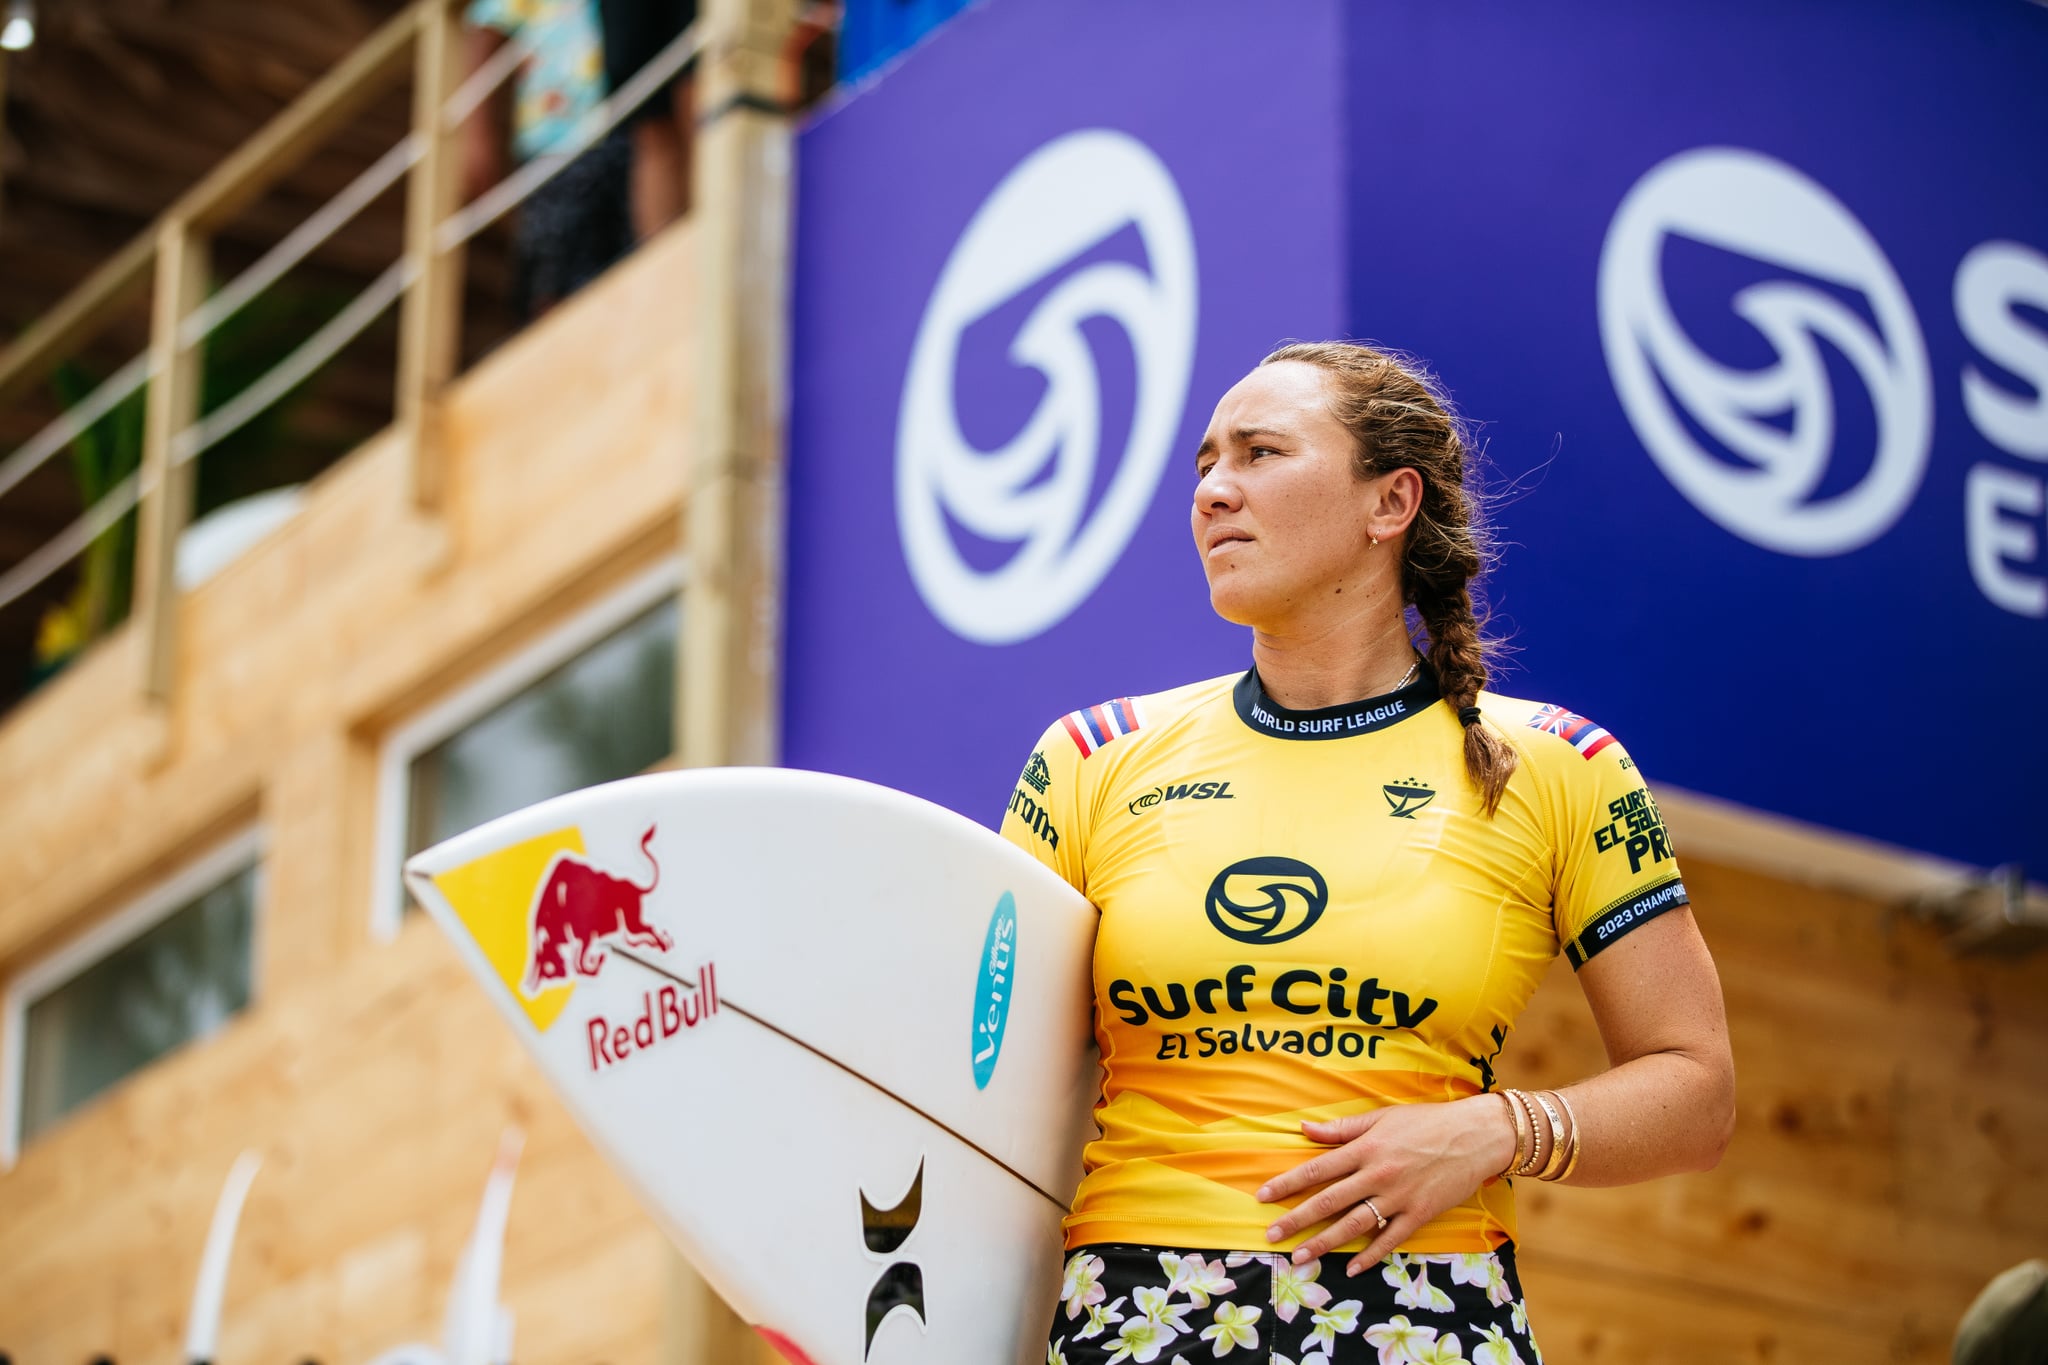 PUNTA ROCA, LA LIBERTAD, EL SALVADOR - JUNE 10: Five-time WSL Champion Carissa Moore of Hawaii prior to surfing in Heat 2 of the Opening Round at the Surf City El Salvador Pro on June 10, 2023 at Punta Roca, La Libertad, El Salvador. (Photo by Aaron Hughes/World Surf League via Getty Images)